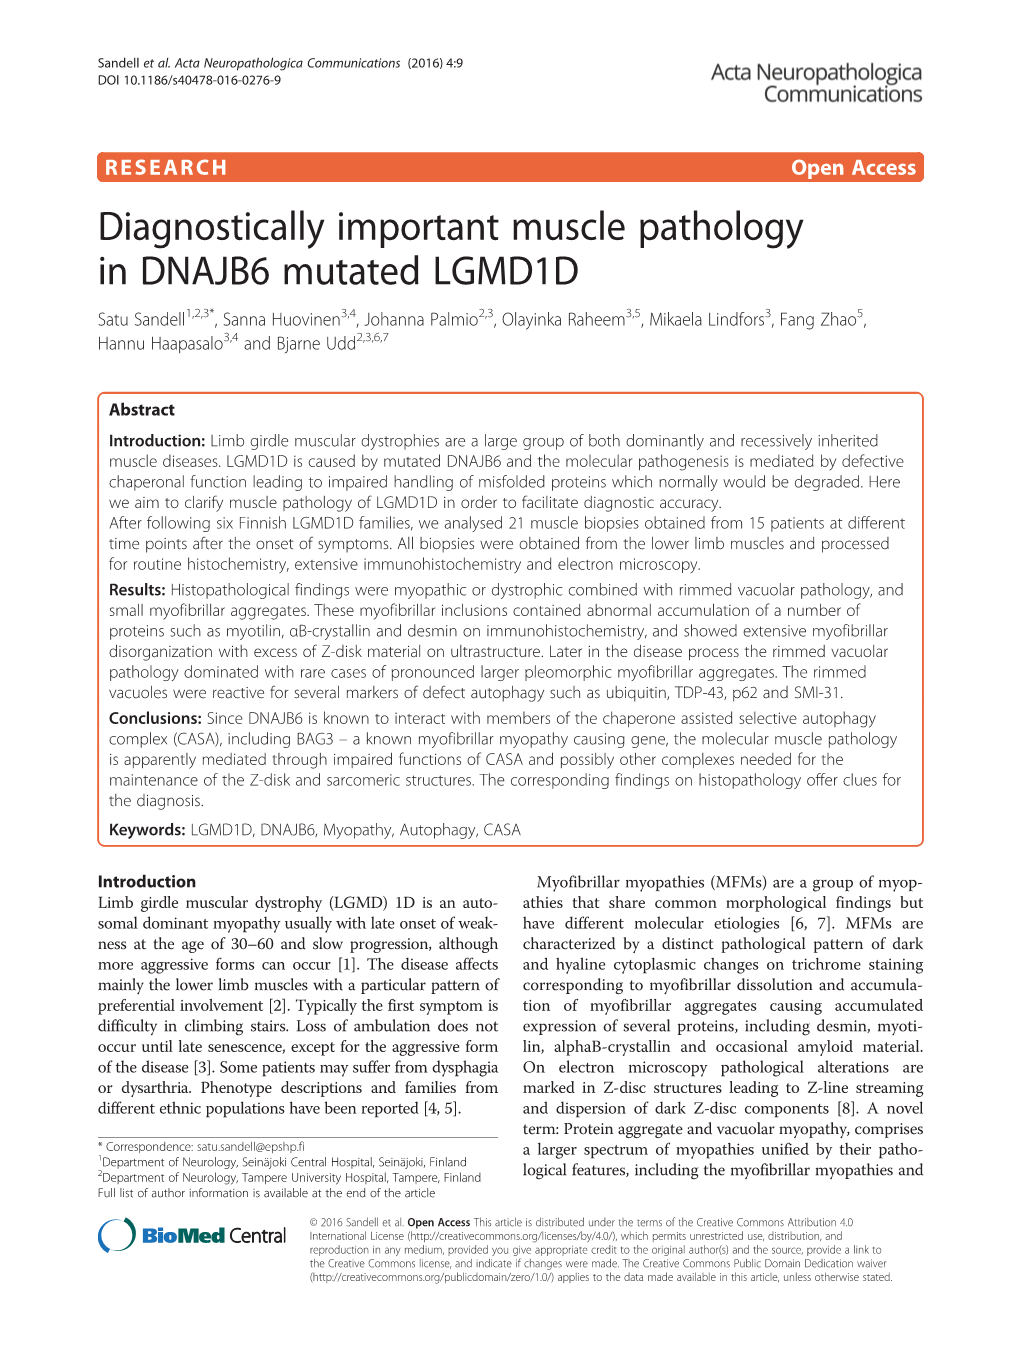 Diagnostically Important Muscle Pathology in DNAJB6 Mutated